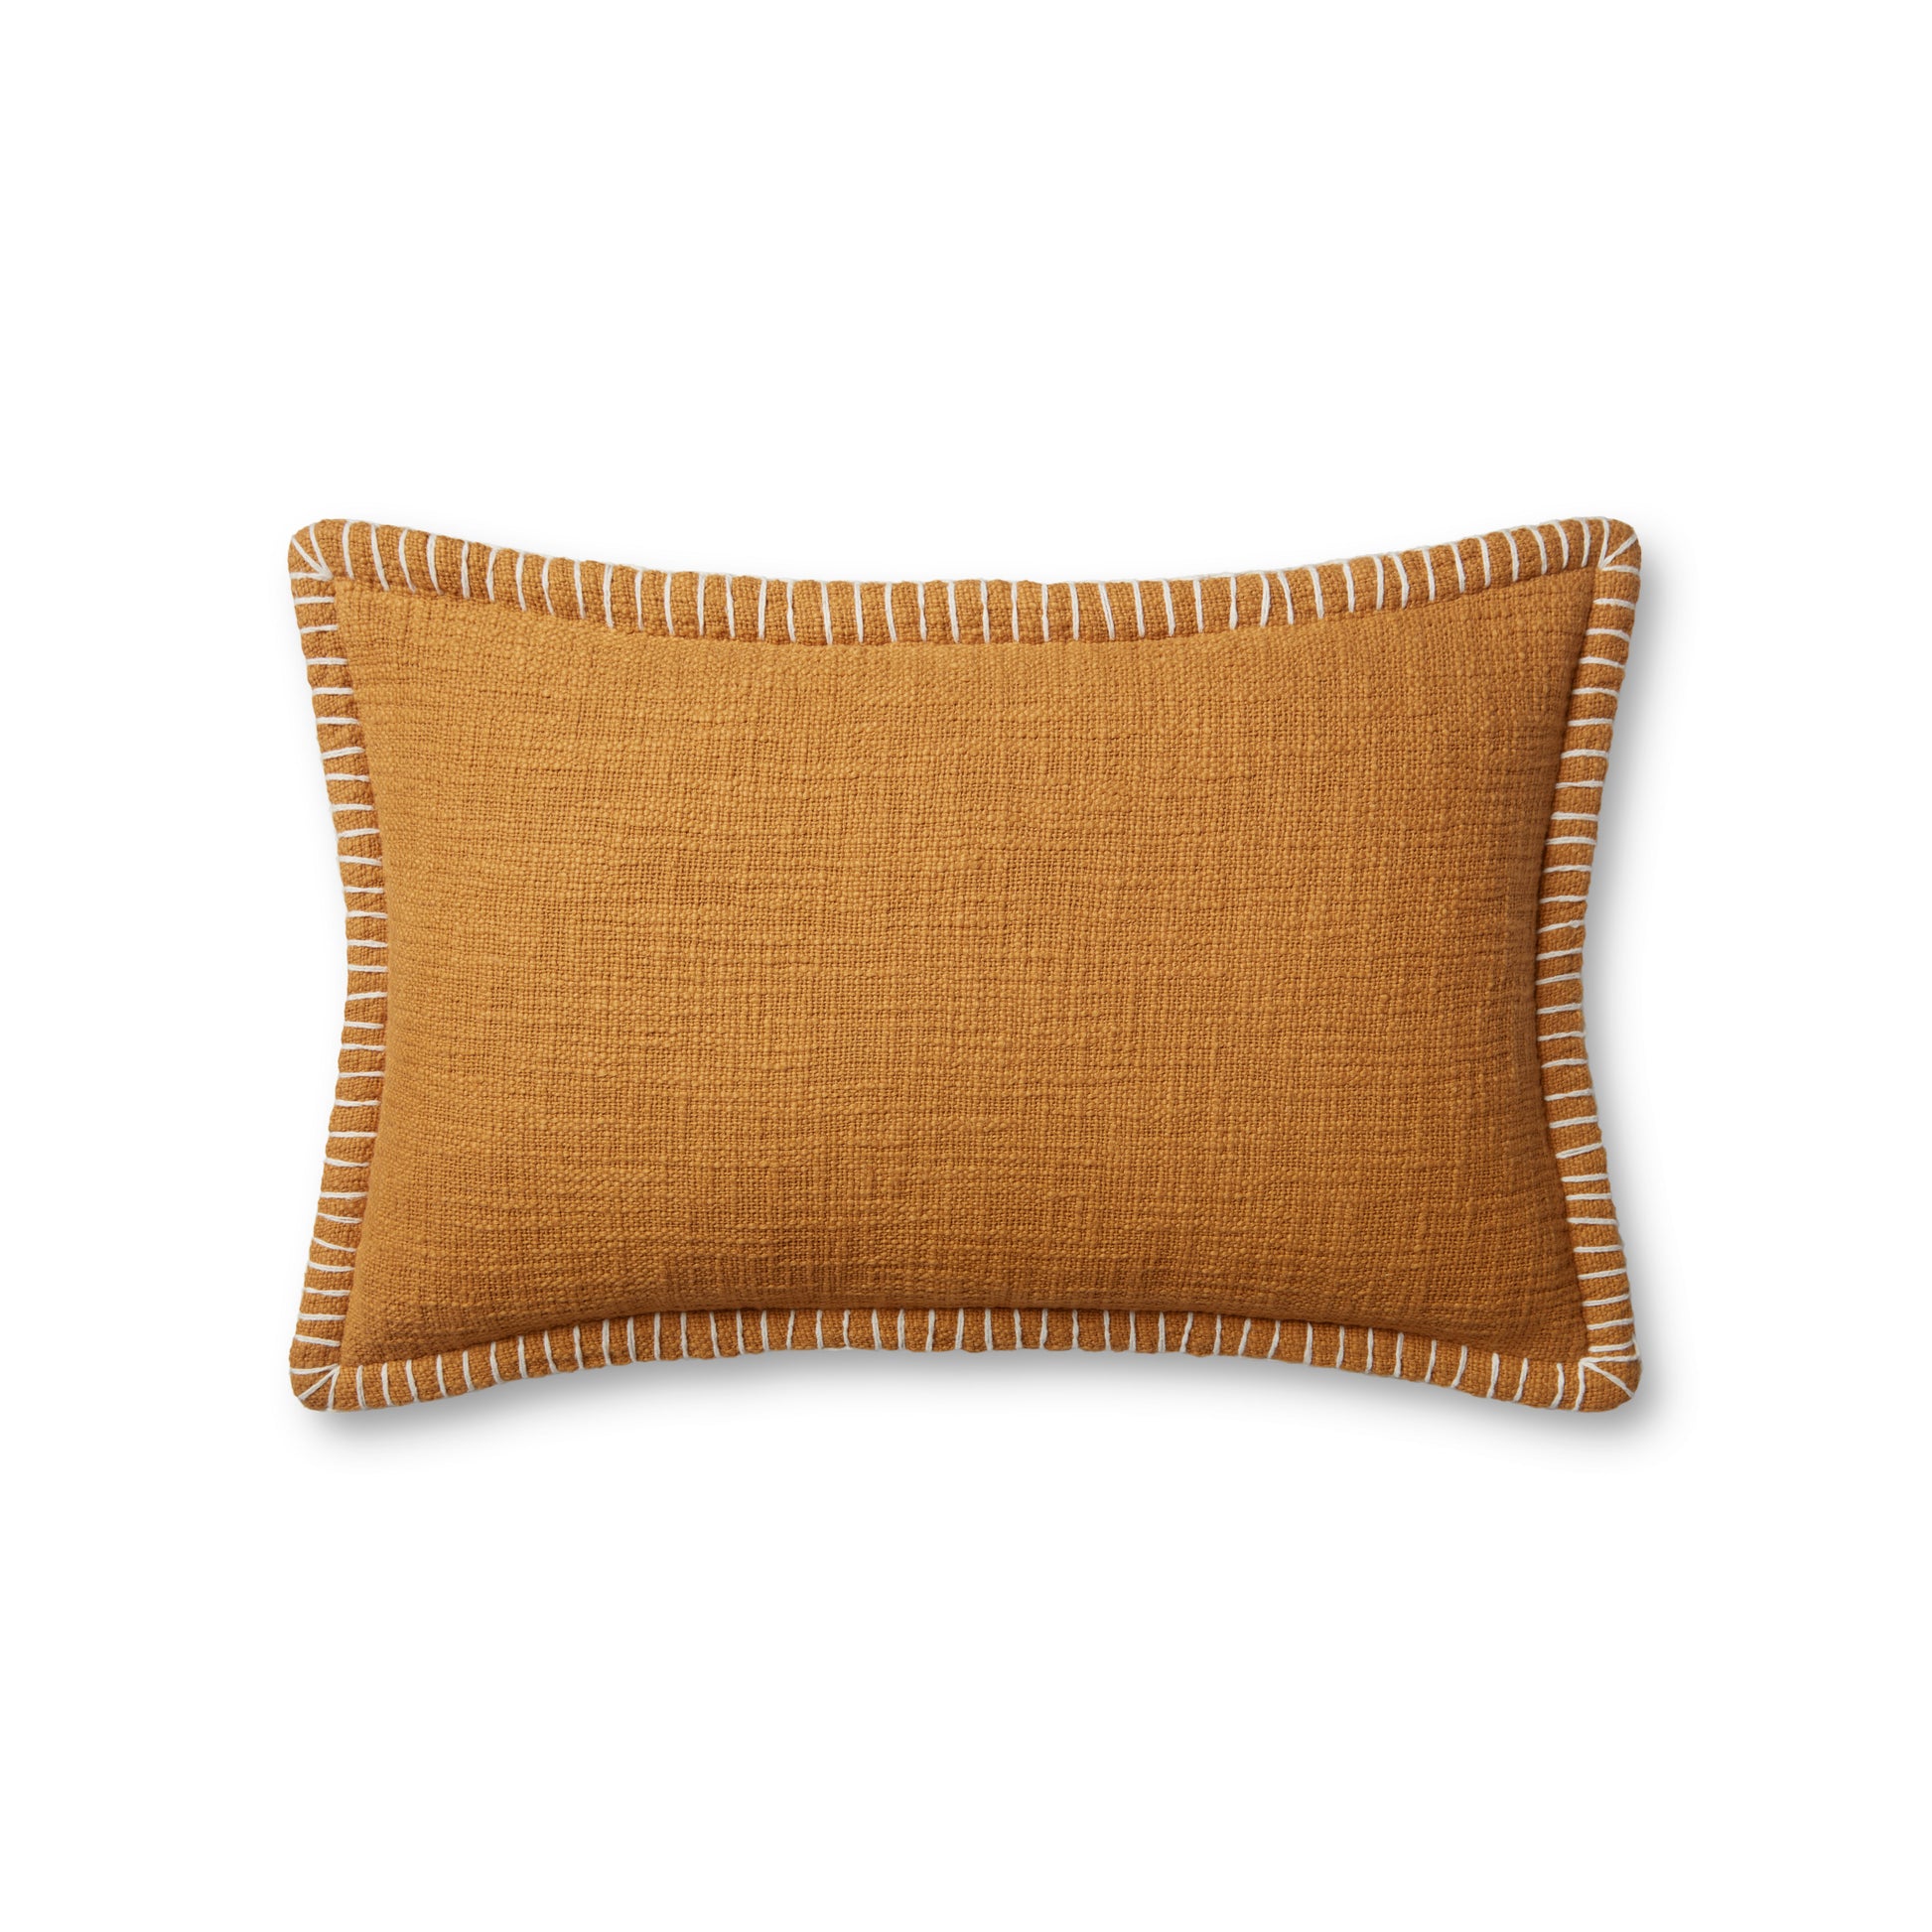 Photo of a pillow;  PLL0109 Gold 13'' x 21'' Cover w/Poly Pillow